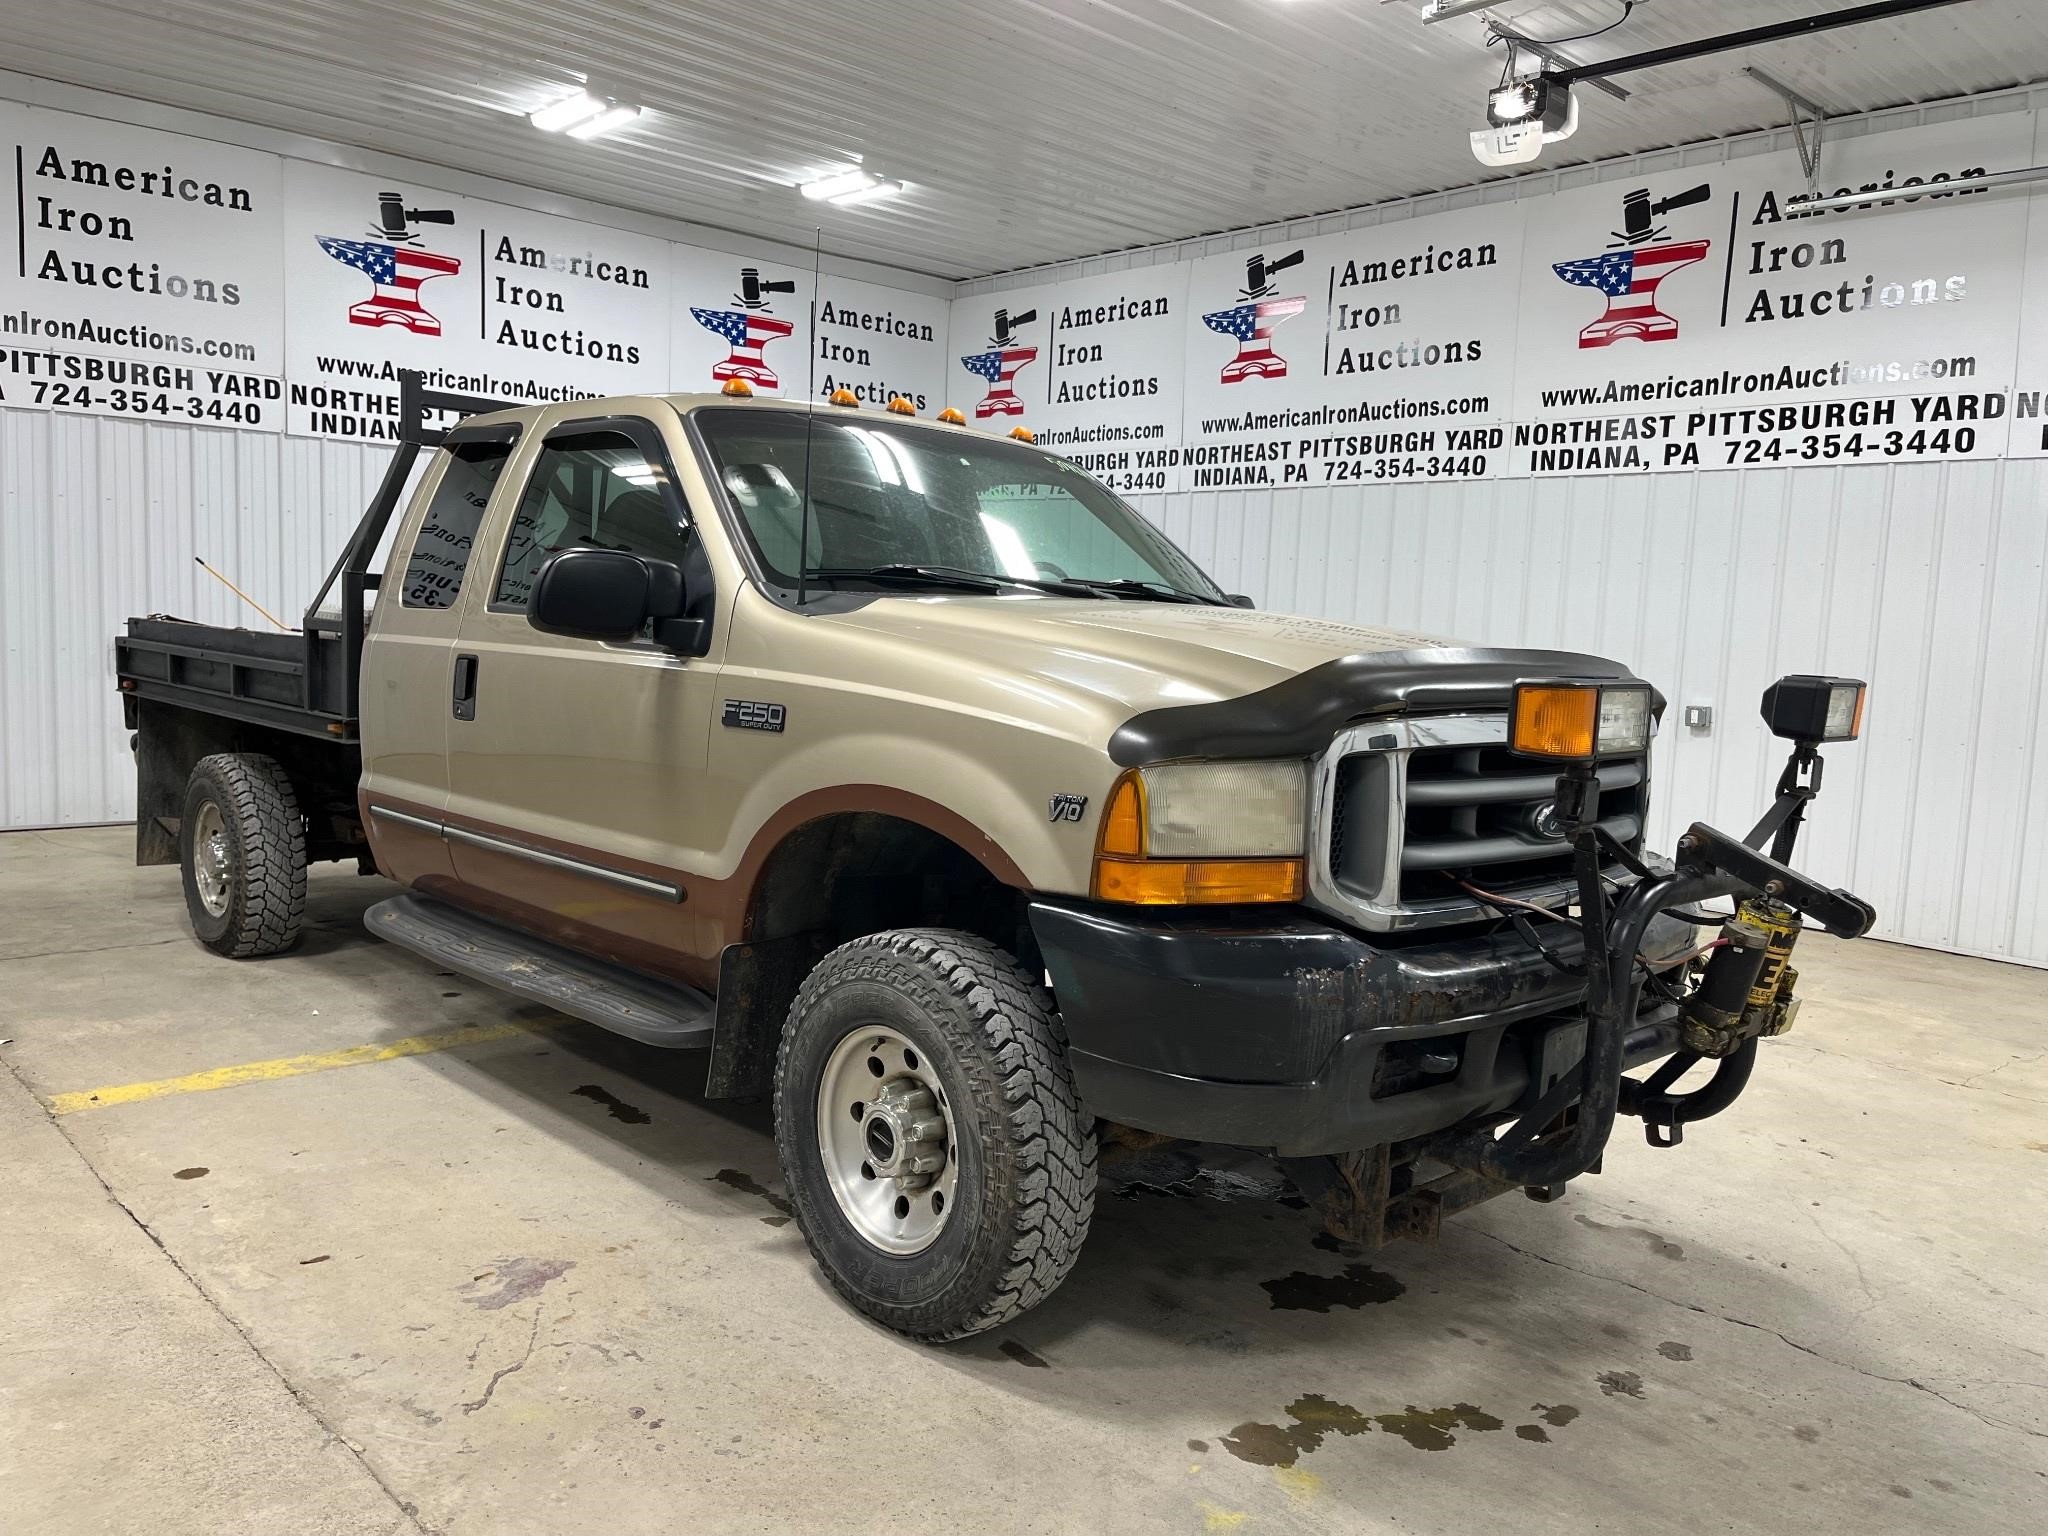 2000 Ford F250 Ext Cab w/Snowplow-Titled